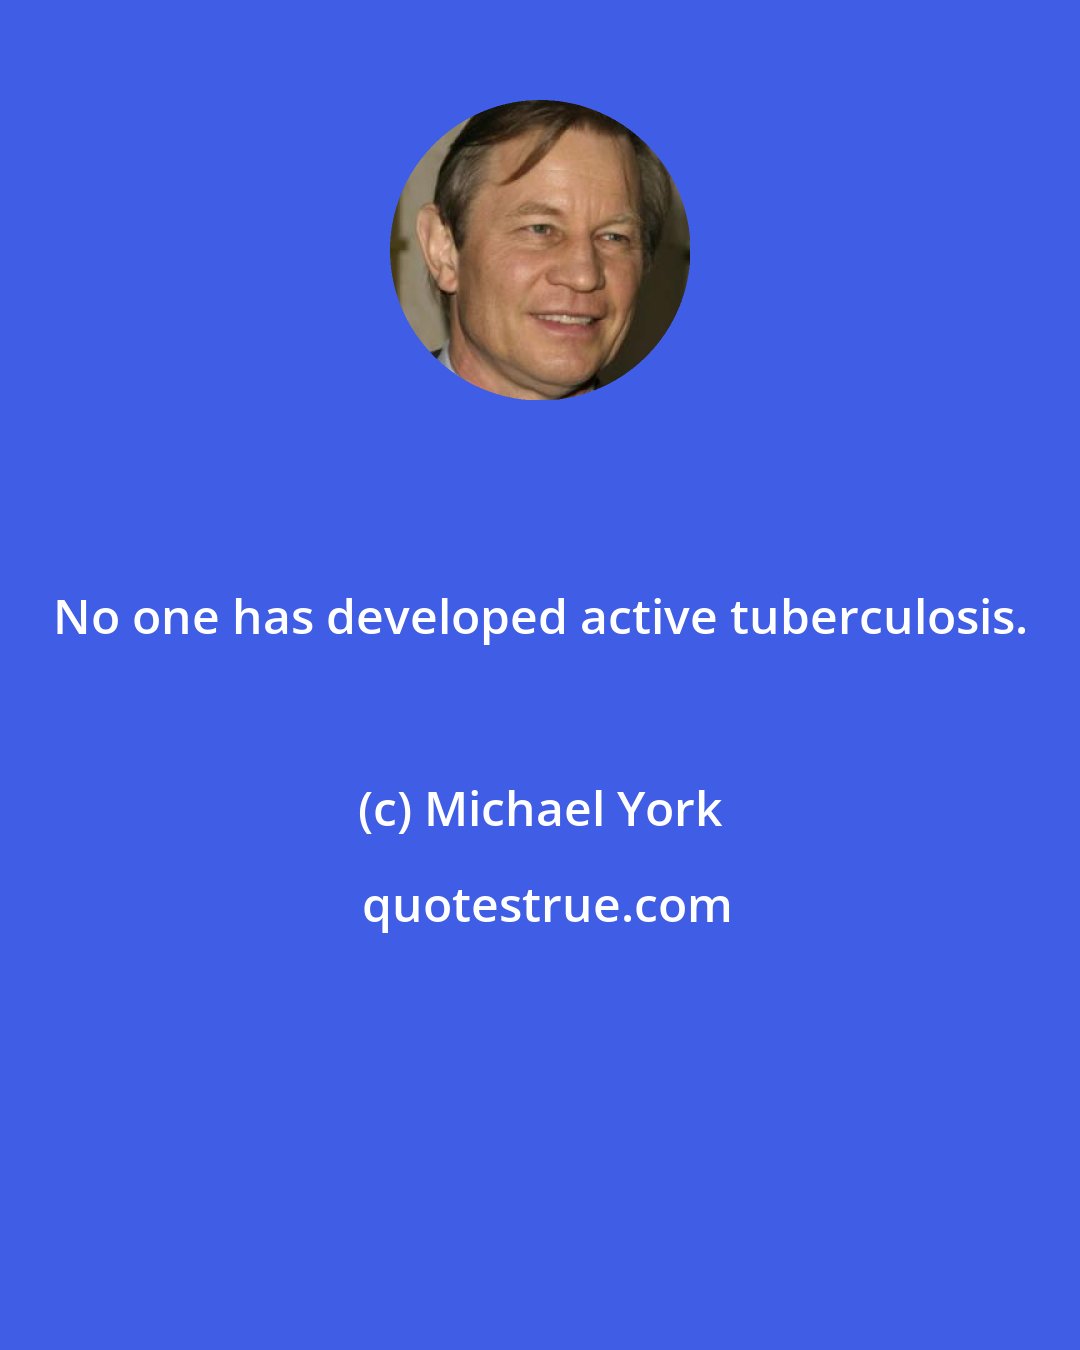 Michael York: No one has developed active tuberculosis.